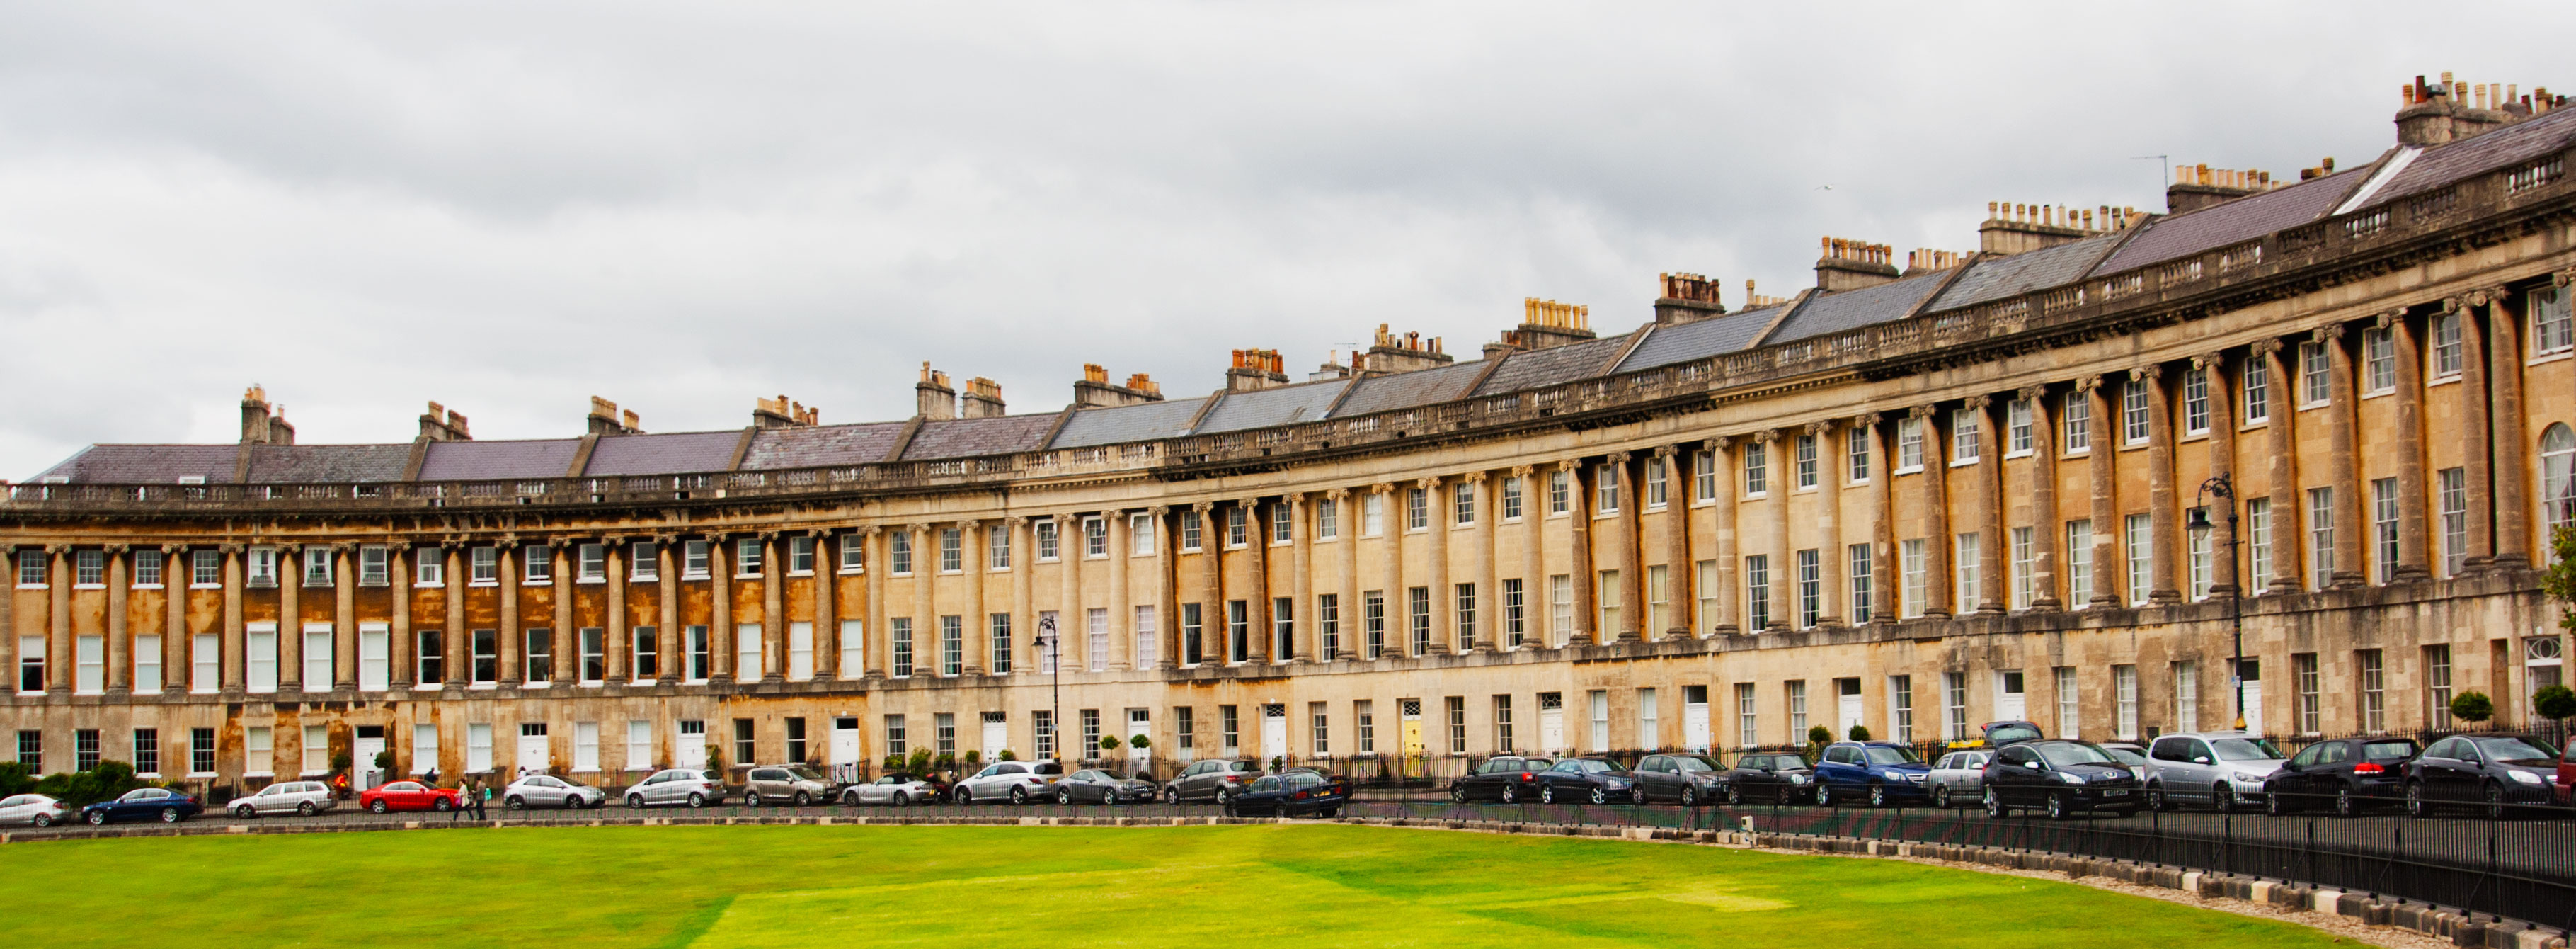 9 Things to Do in Bath in one day